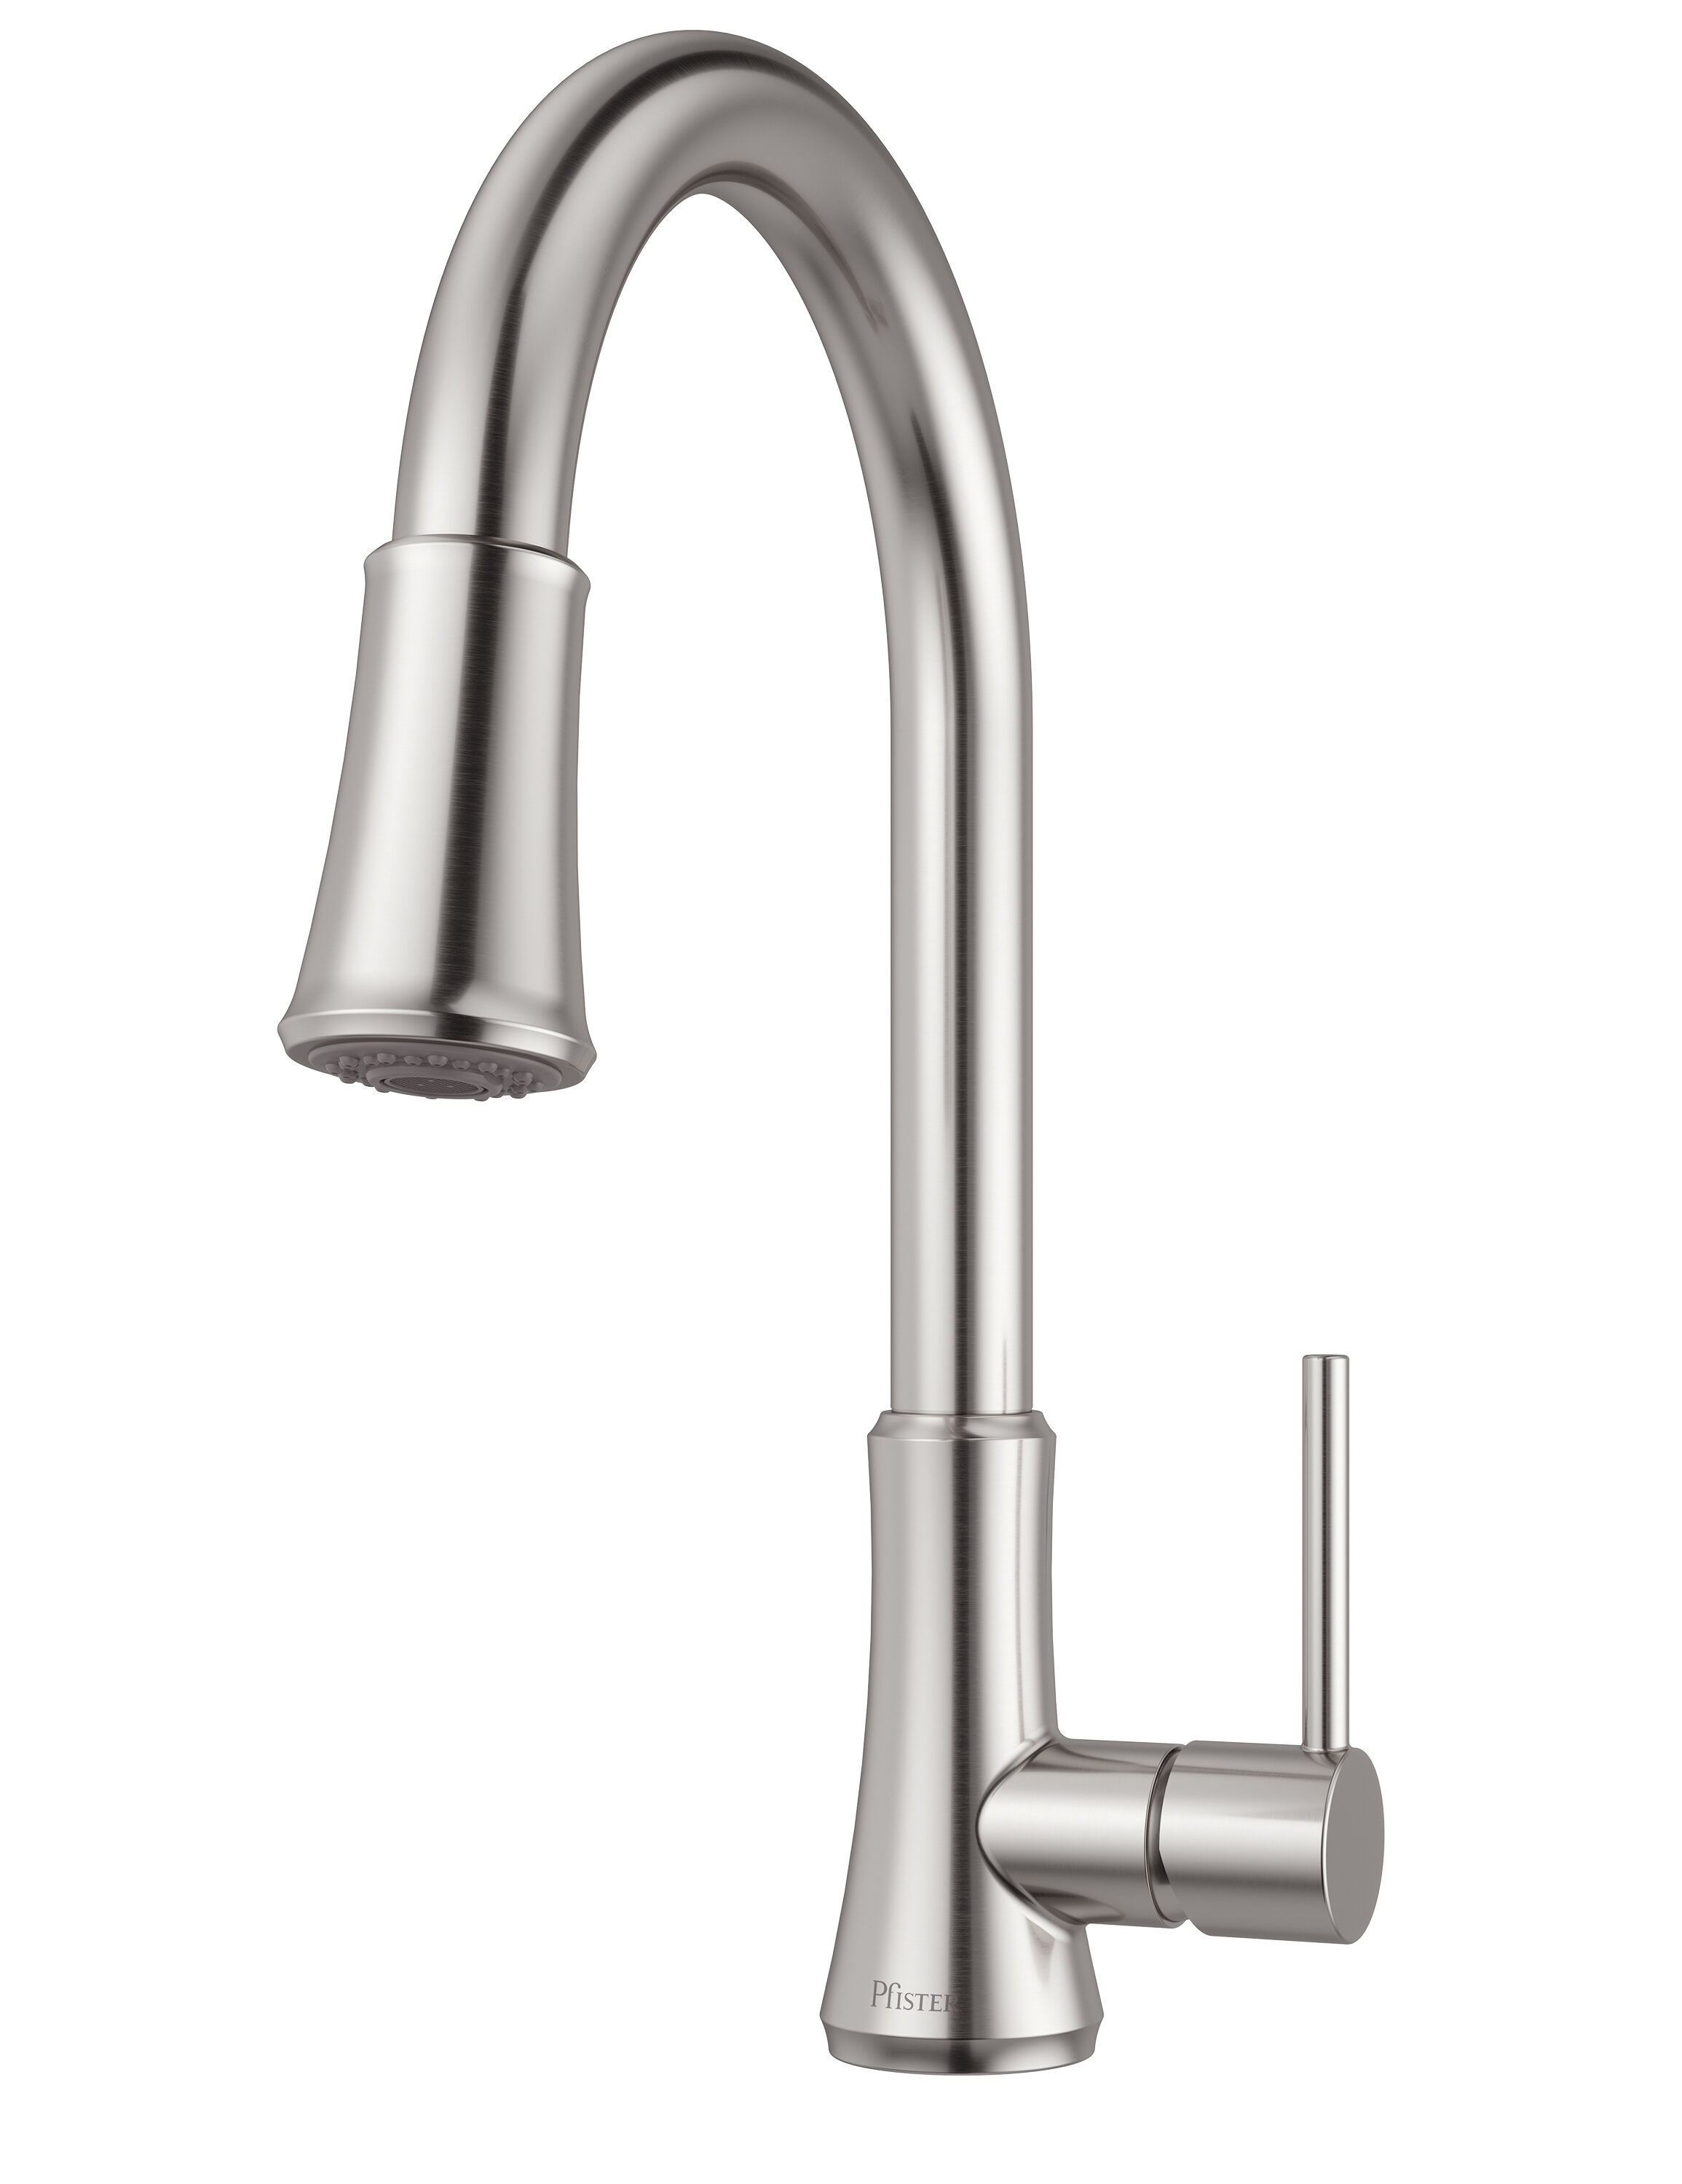 Price Pfister Single Handle Kitchen Faucet / Pfister Gt529wh1s Wheaton